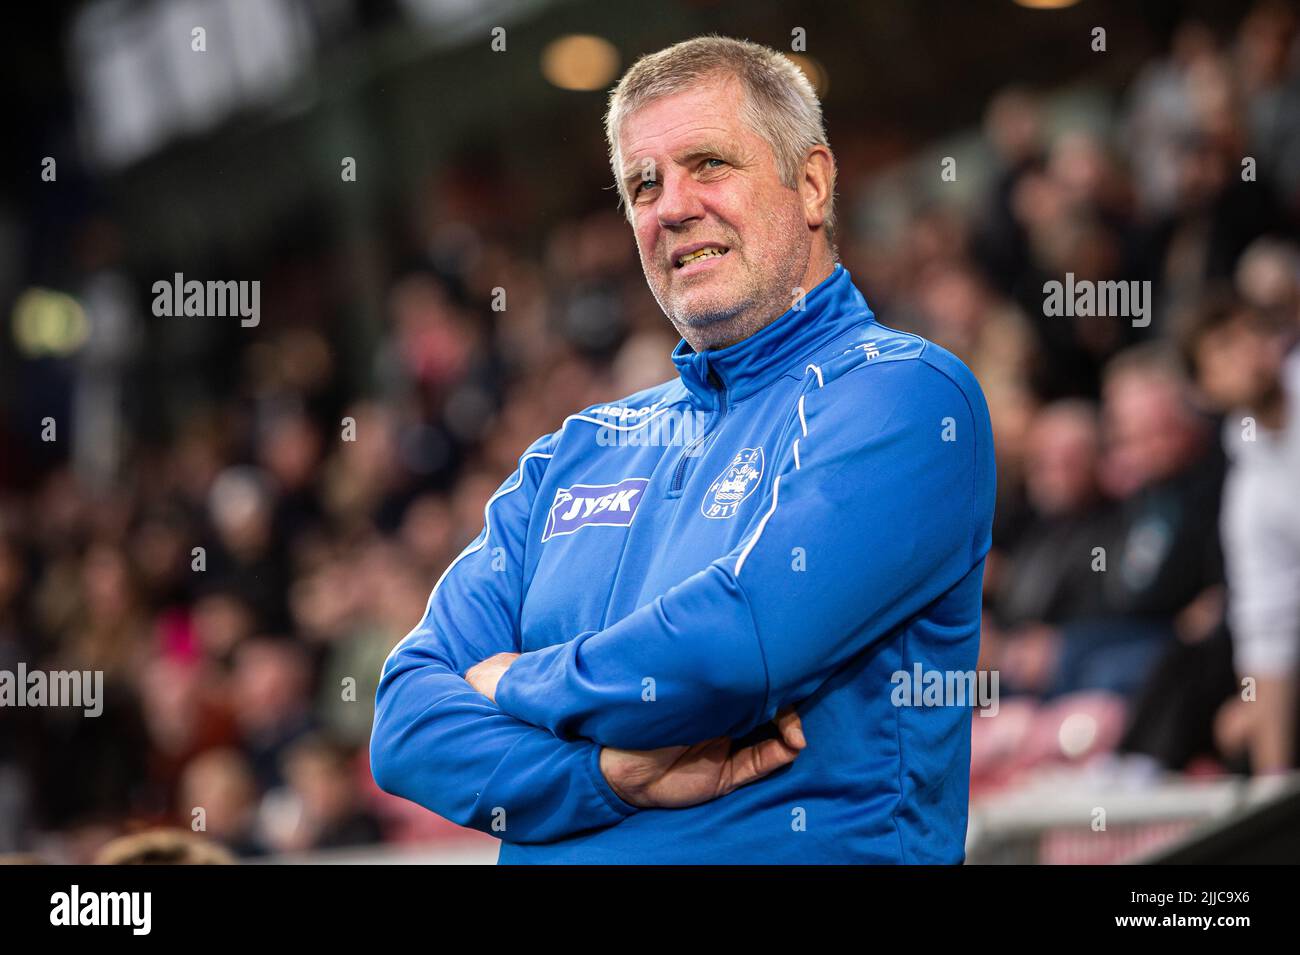 Herning, Denmark. 22nd, July 2022. Head coach Kent Nielsen of Silkeborg IF seen during the 3F Superliga match between FC Midtjylland and Silkeborg IF at MCH Arena in Herning. (Photo credit: Gonzales Photo - Morten Kjaer). Stock Photo